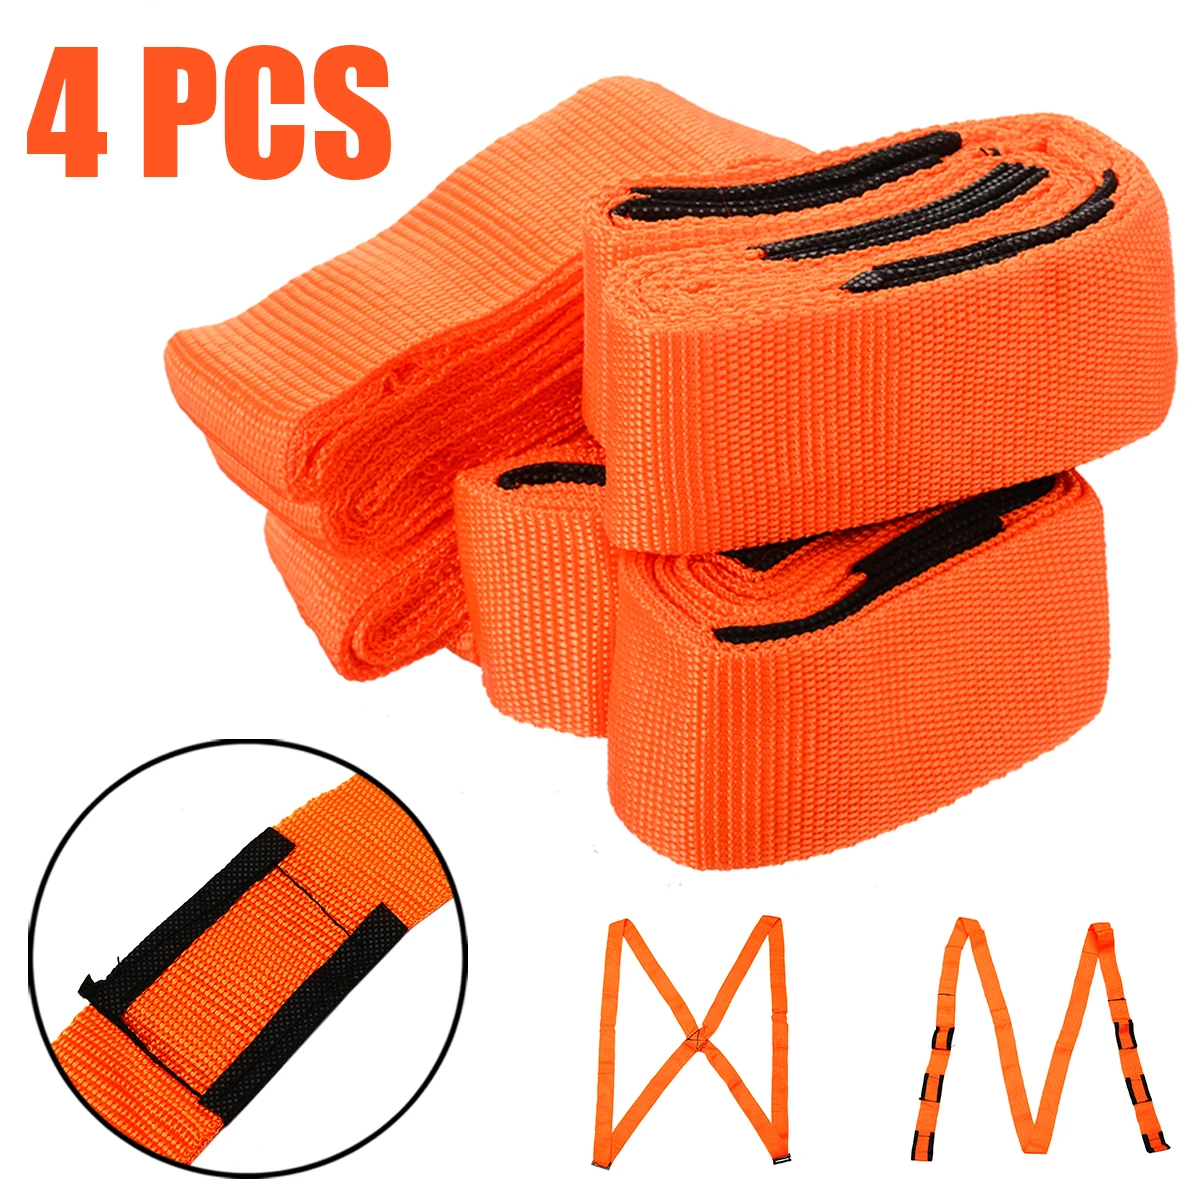 4Pcs Lifting Moving Straps Harnesses Heavy Duty Transport Furniture Cargo Movers Carry Rope Aid Shoulder Belt